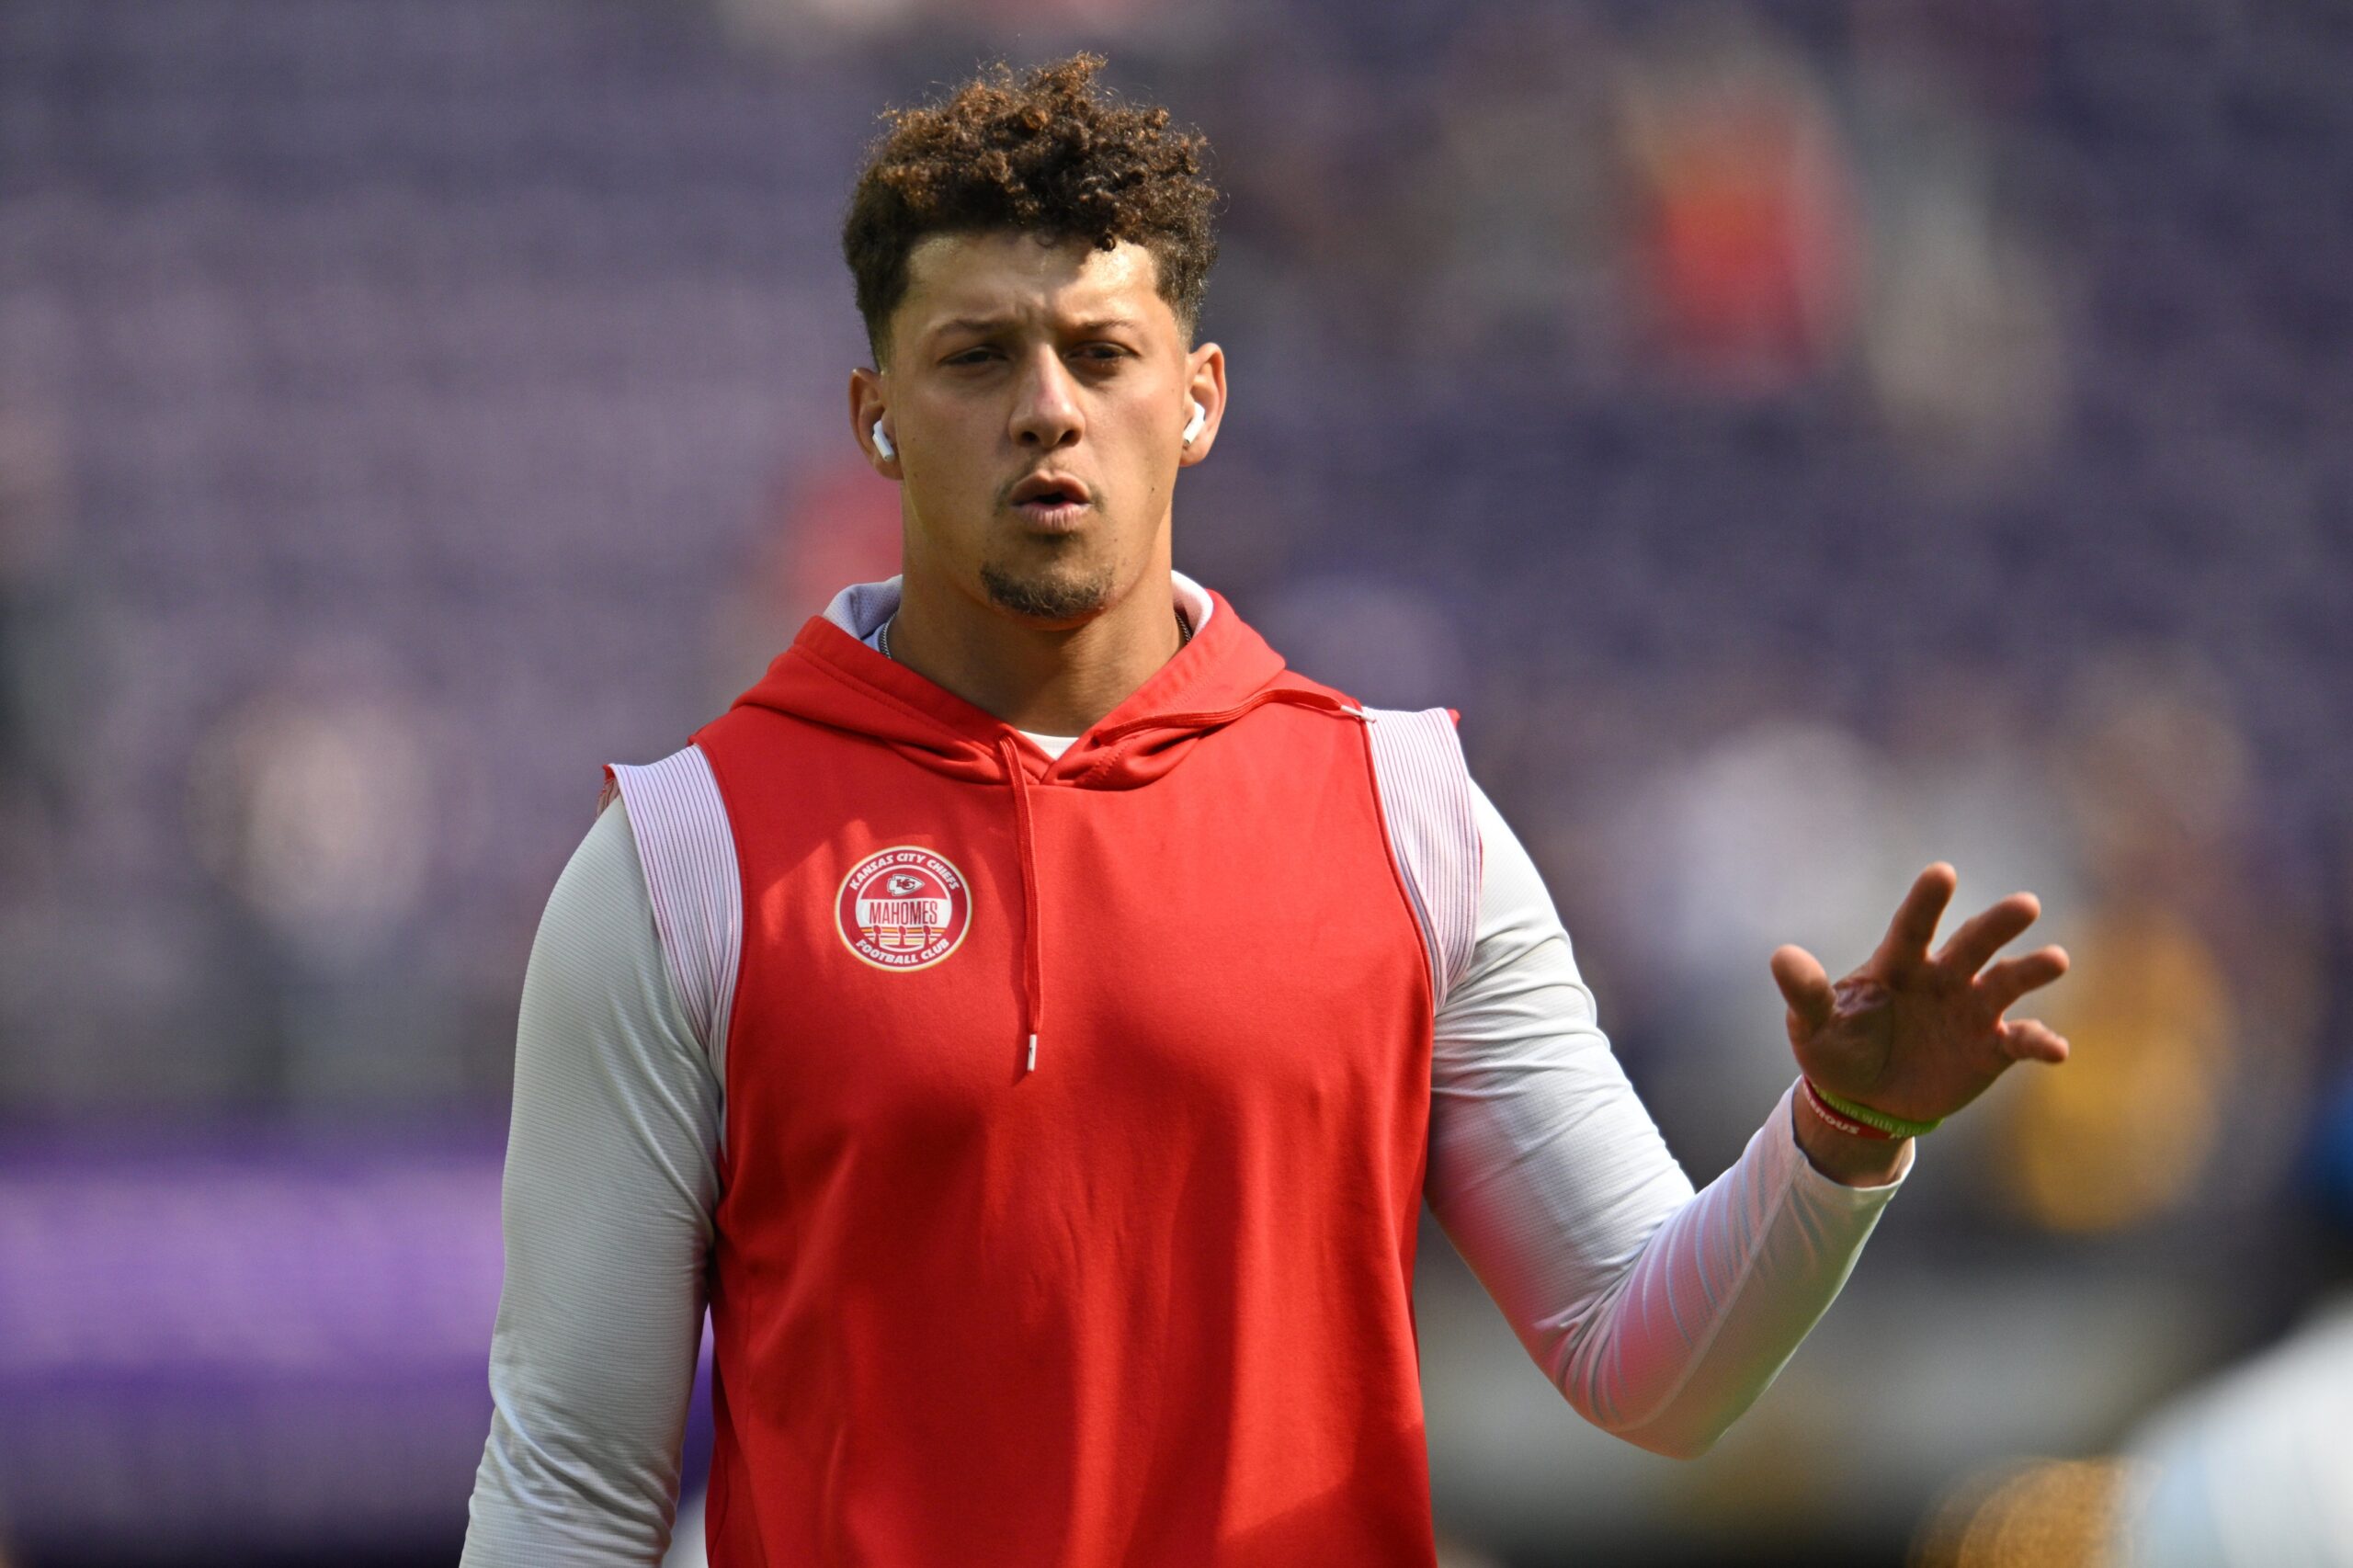 Patrick Mahomes Was First Drafted By the MLB Before the NFL